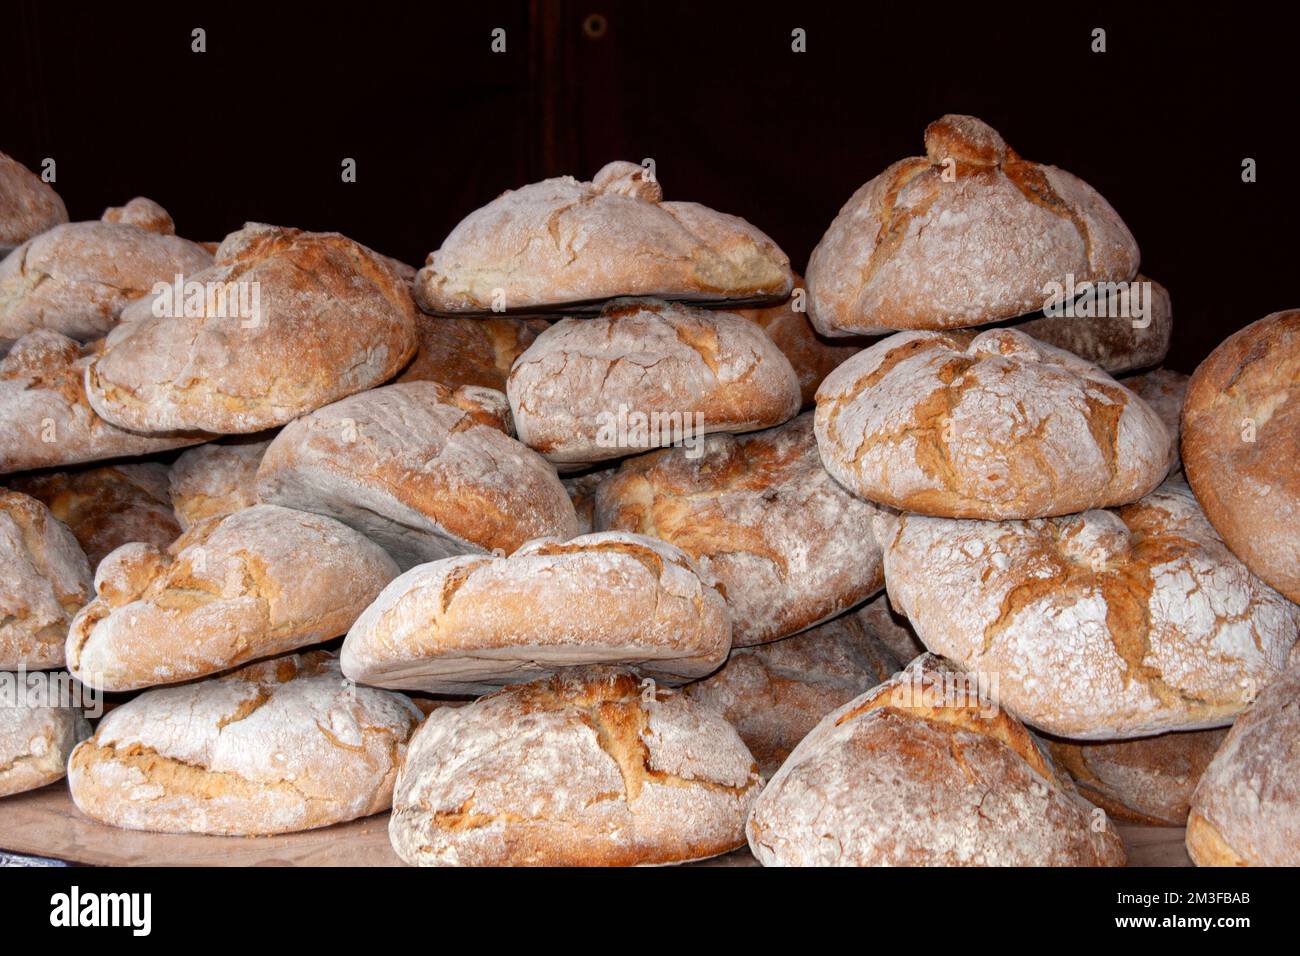 The traditional Galician bread for sale in a bakery in Galicia, Spain Stock Photo